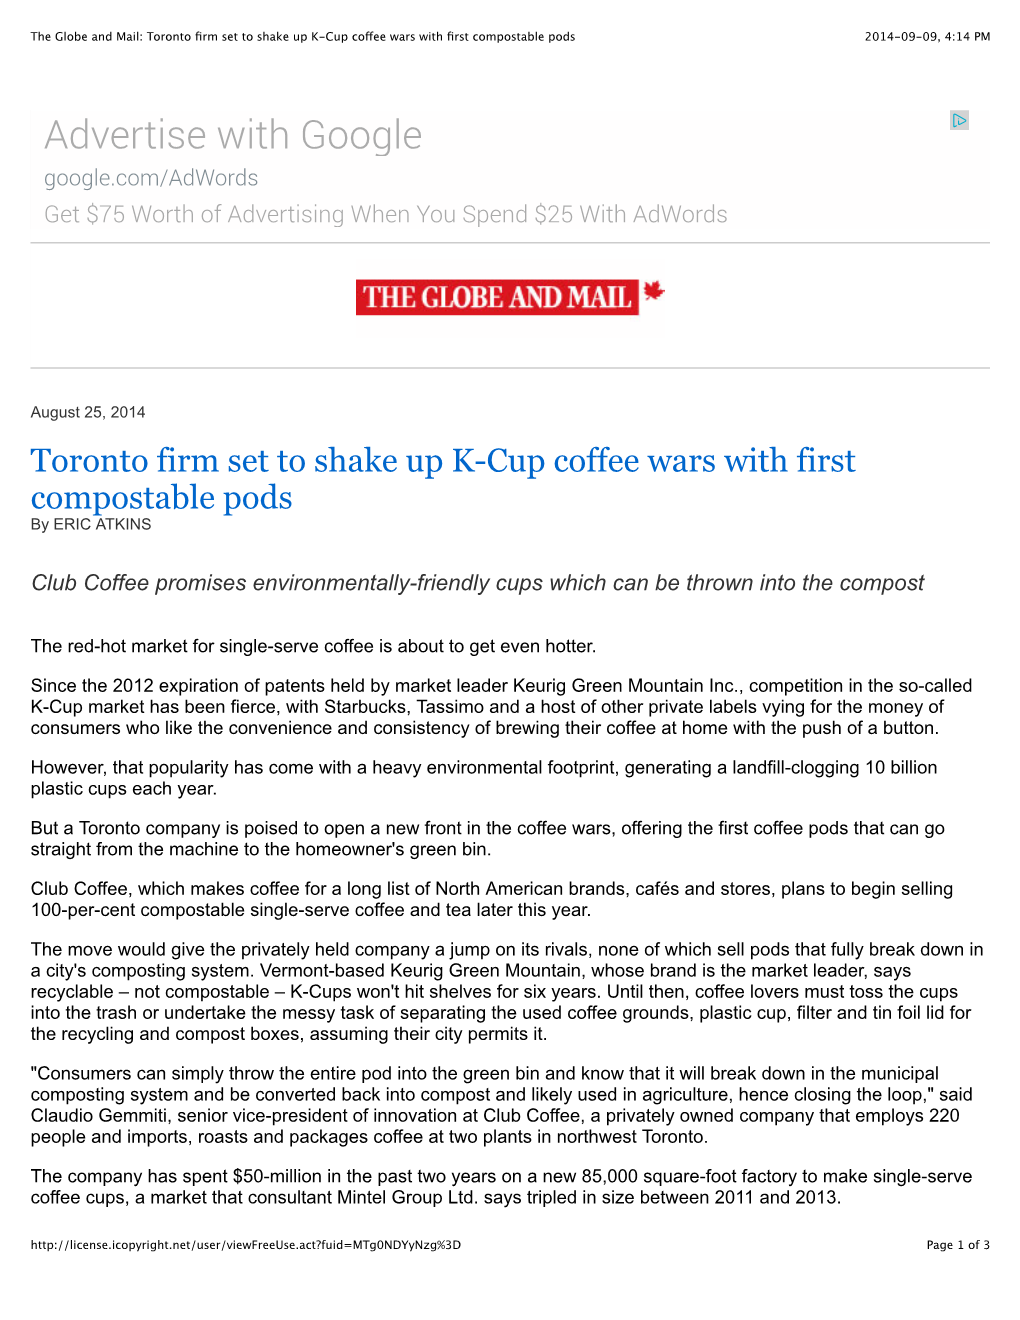 The Globe and Mail: Toronto Firm Set to Shake up K-Cup Coffee Wars with First Compostable Pods